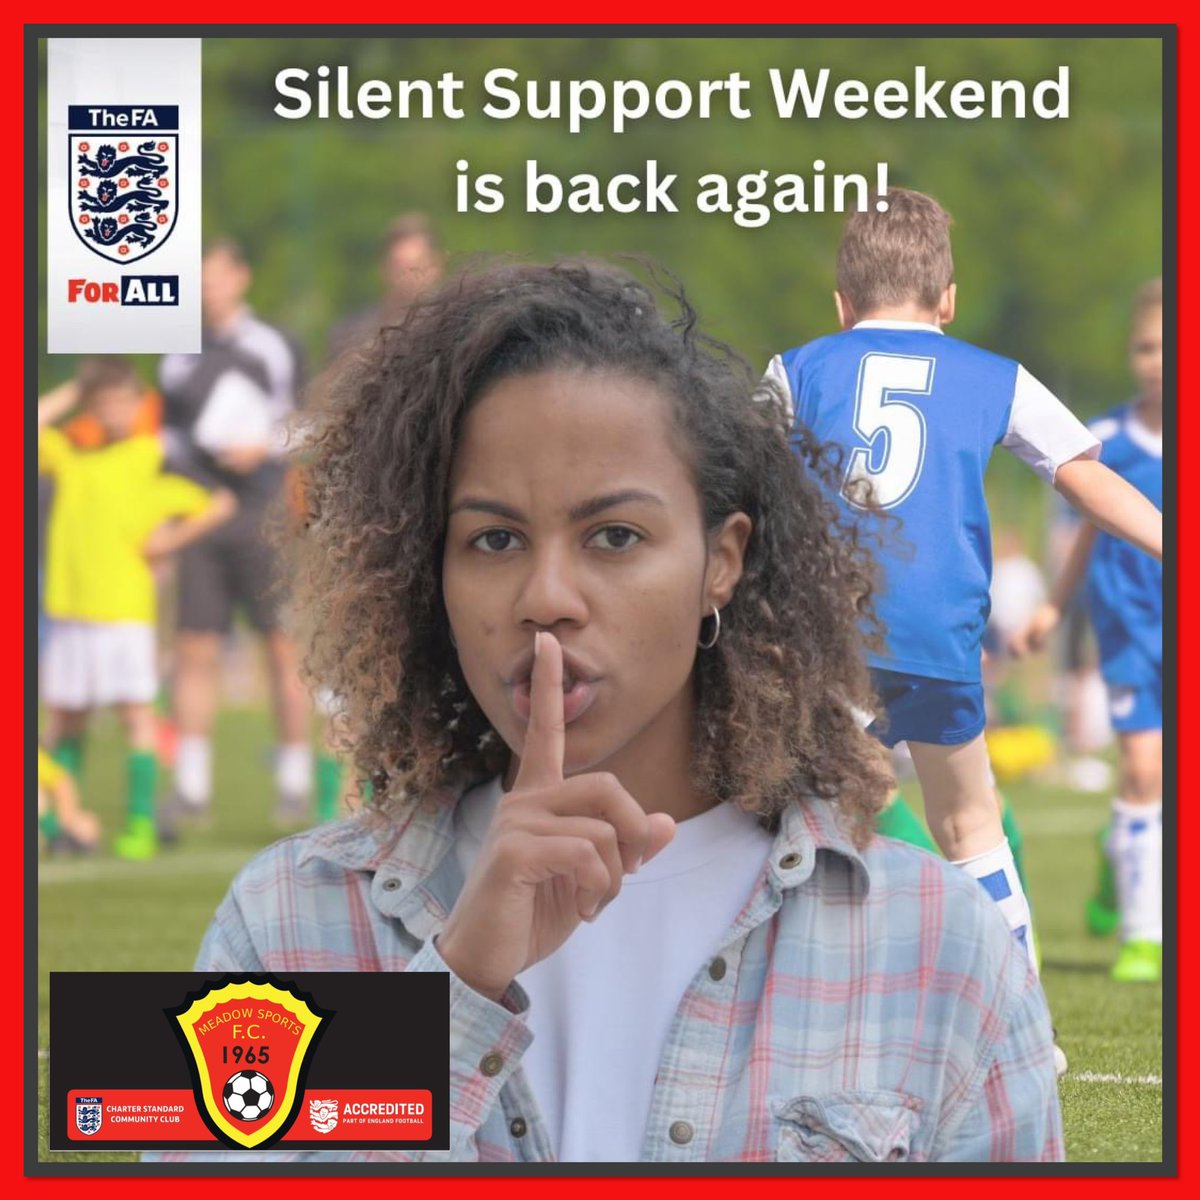 1/3 Unsurprisingly the only home games going ahead today are on our all weather 3G pitch.  For these games and any away games Meadow Sports FC is once again supporting the FA’s Silent Support Weekend. 

It's time for a recording breaking #SilentSupportWeekend 👏